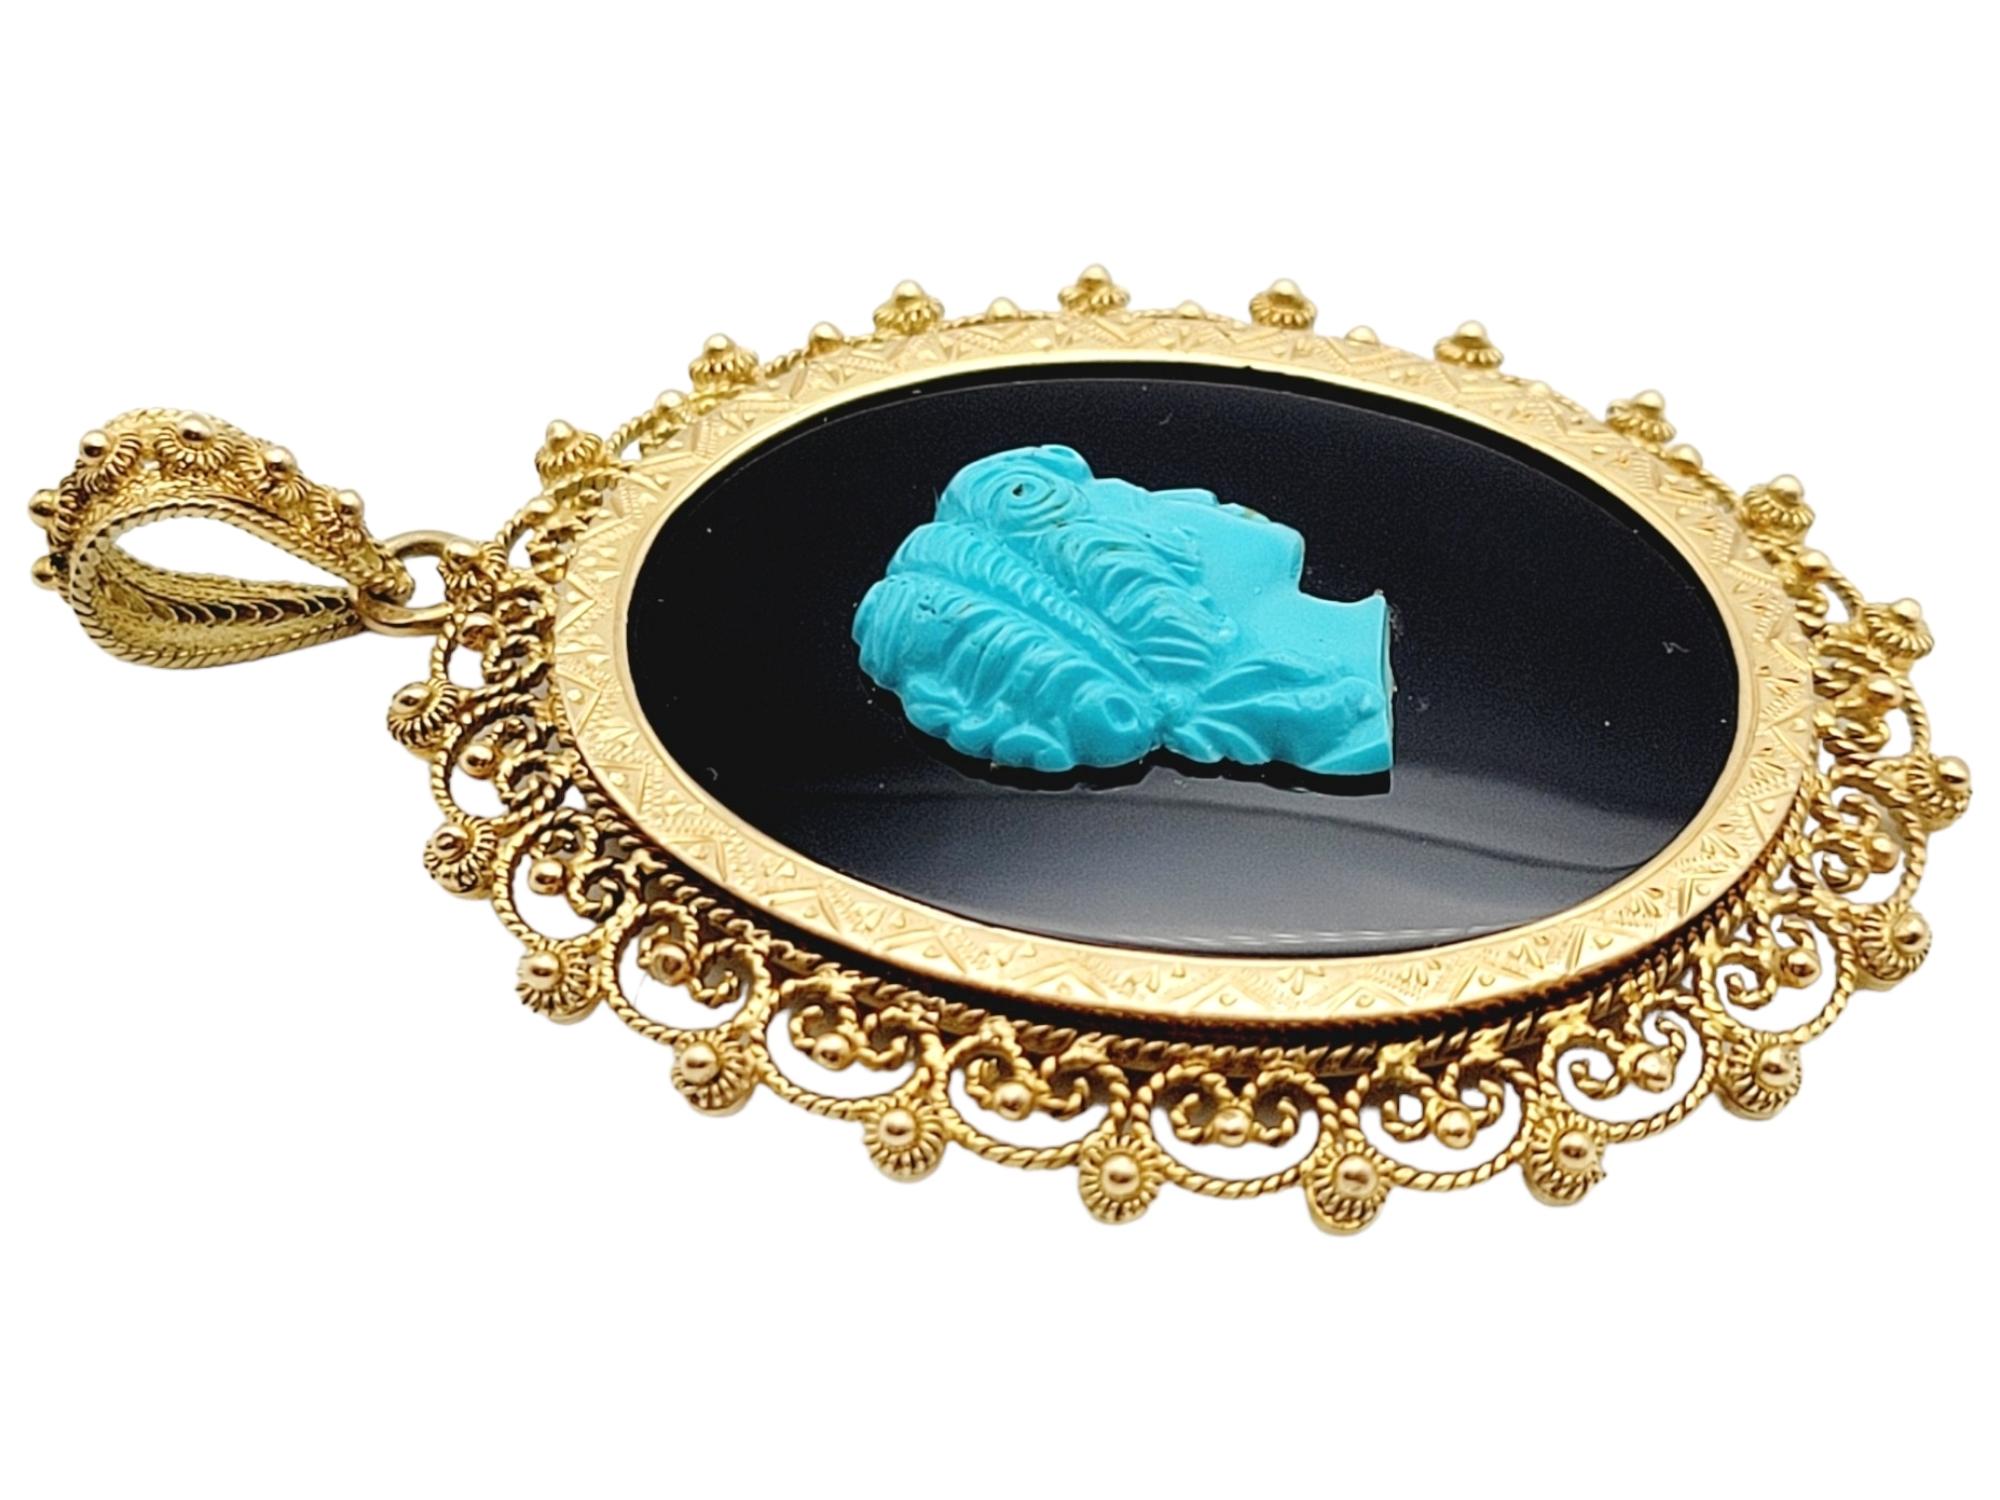 This captivating Victorian lady cameo pendant showcases the mesmerizing beauty of turquoise and onyx. Bezel set in 14-karat yellow gold, this unique pendant exudes elegance and sophistication.

The centerpiece of this pendant is a stunning vibrant